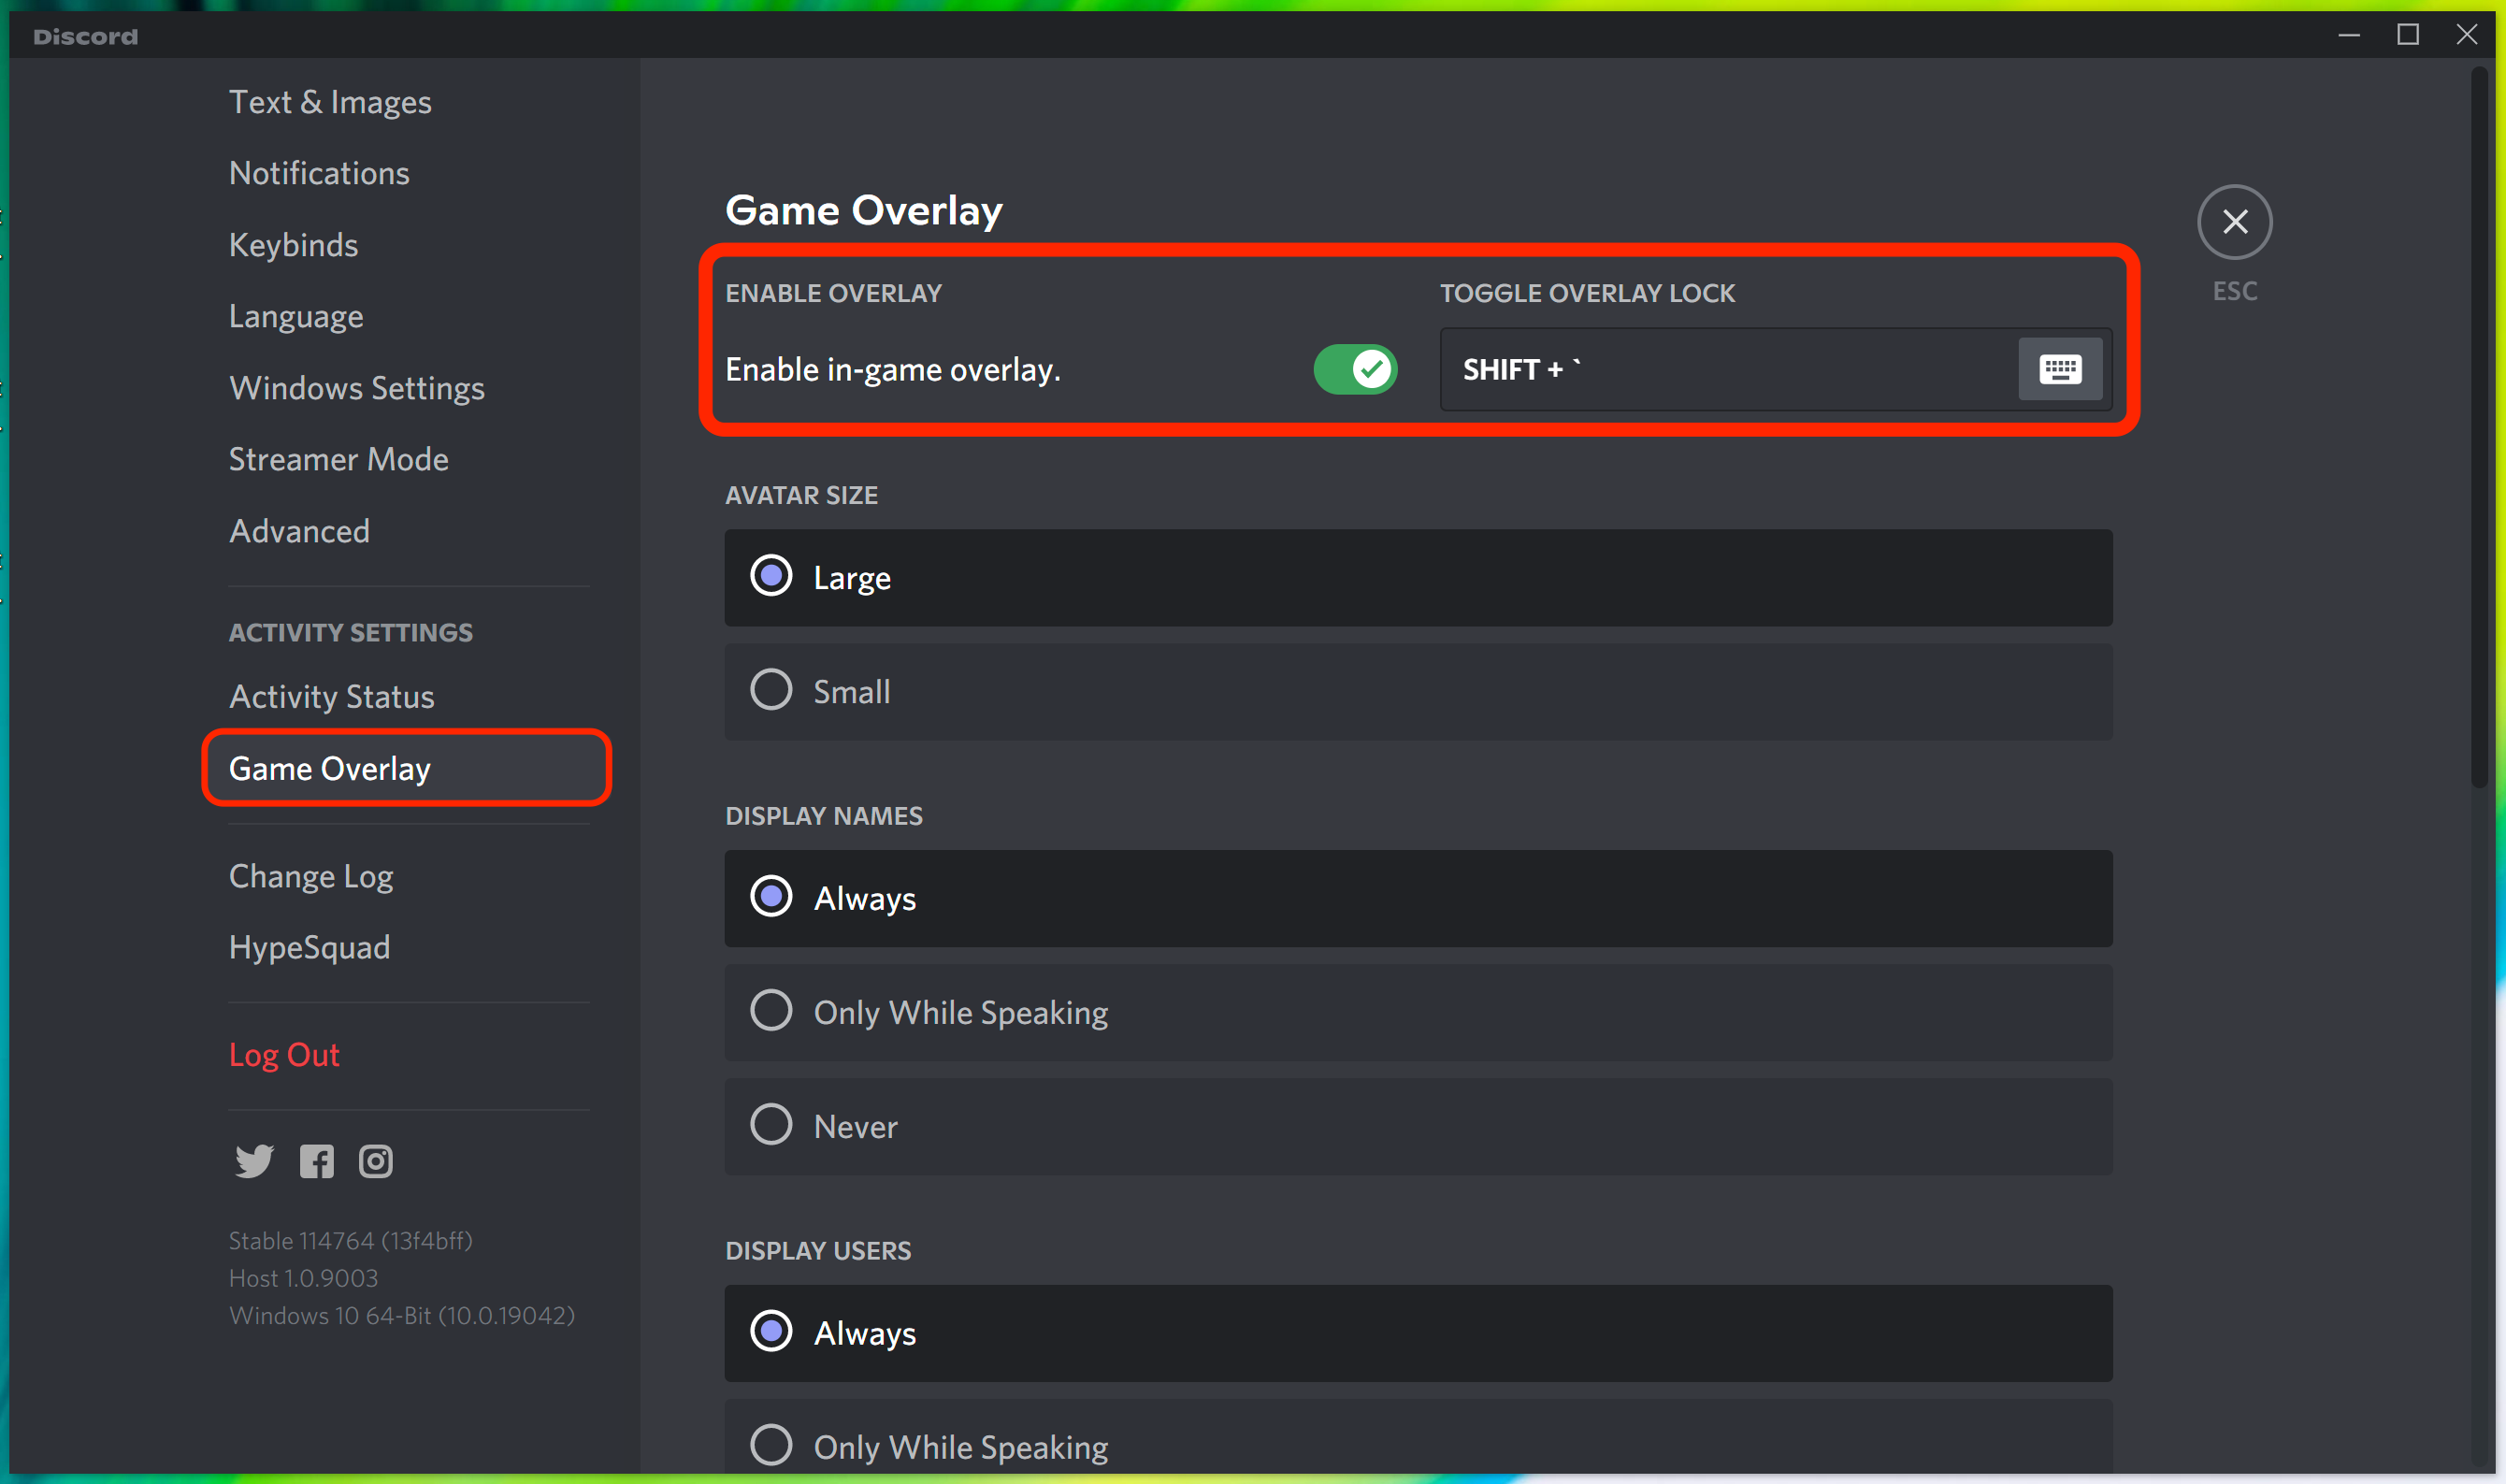 The Game Overlay settings page in the Windows Discord app. The switch to turn the overlay on is highlighted.